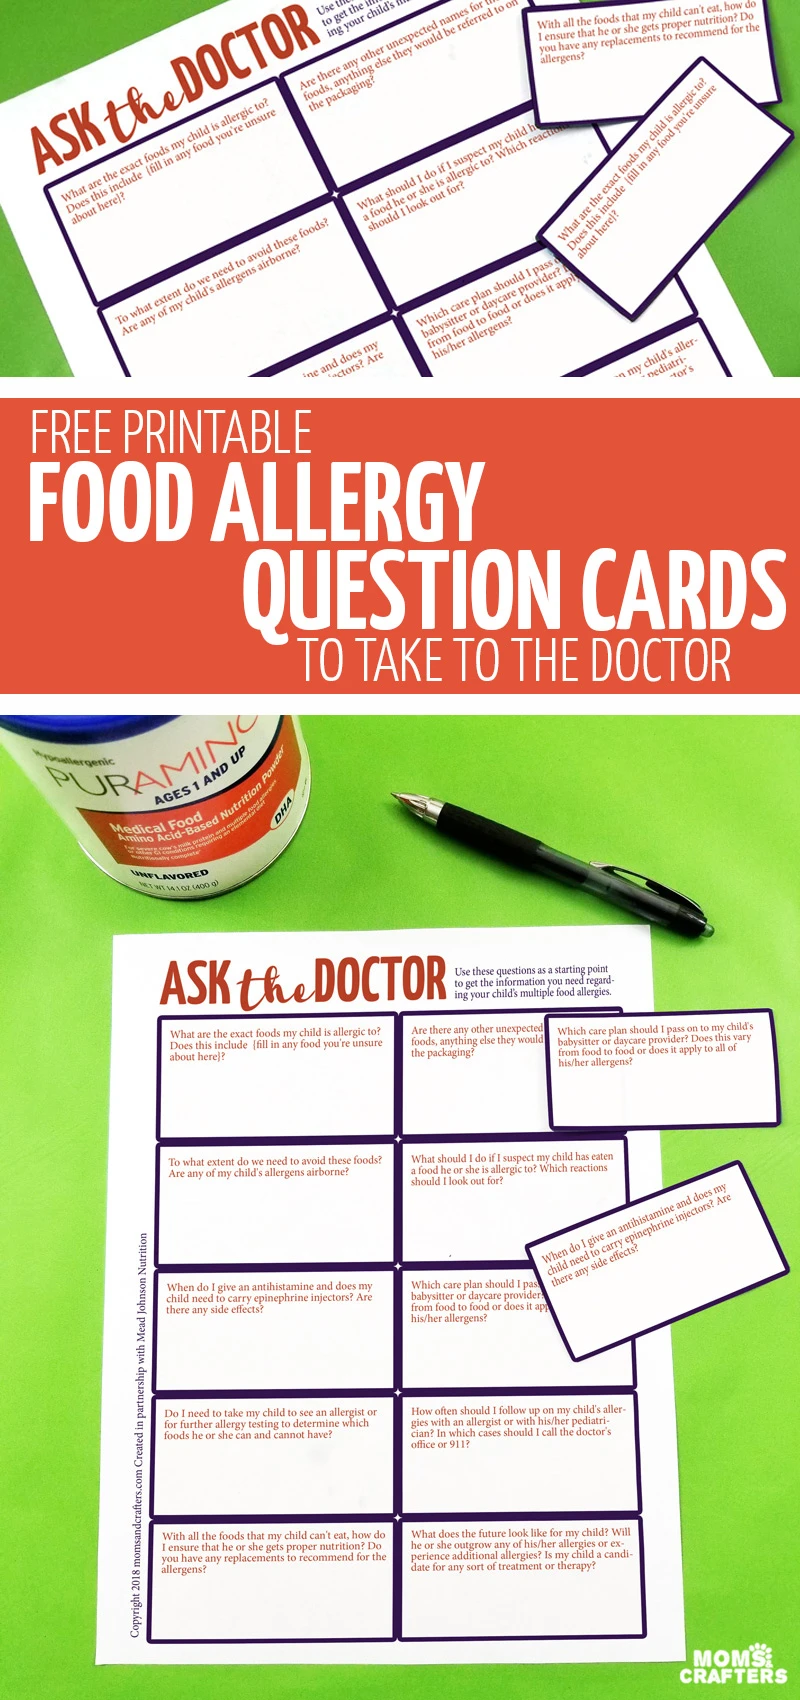 Click for information about #PurAmino and free printable food allergy question cards, perfect for parents who are dealing with kids with multiple food allergies! Ask your doctor parenting questions regarding allergic reactions, nutrition for kids with food allergies, management, and more!